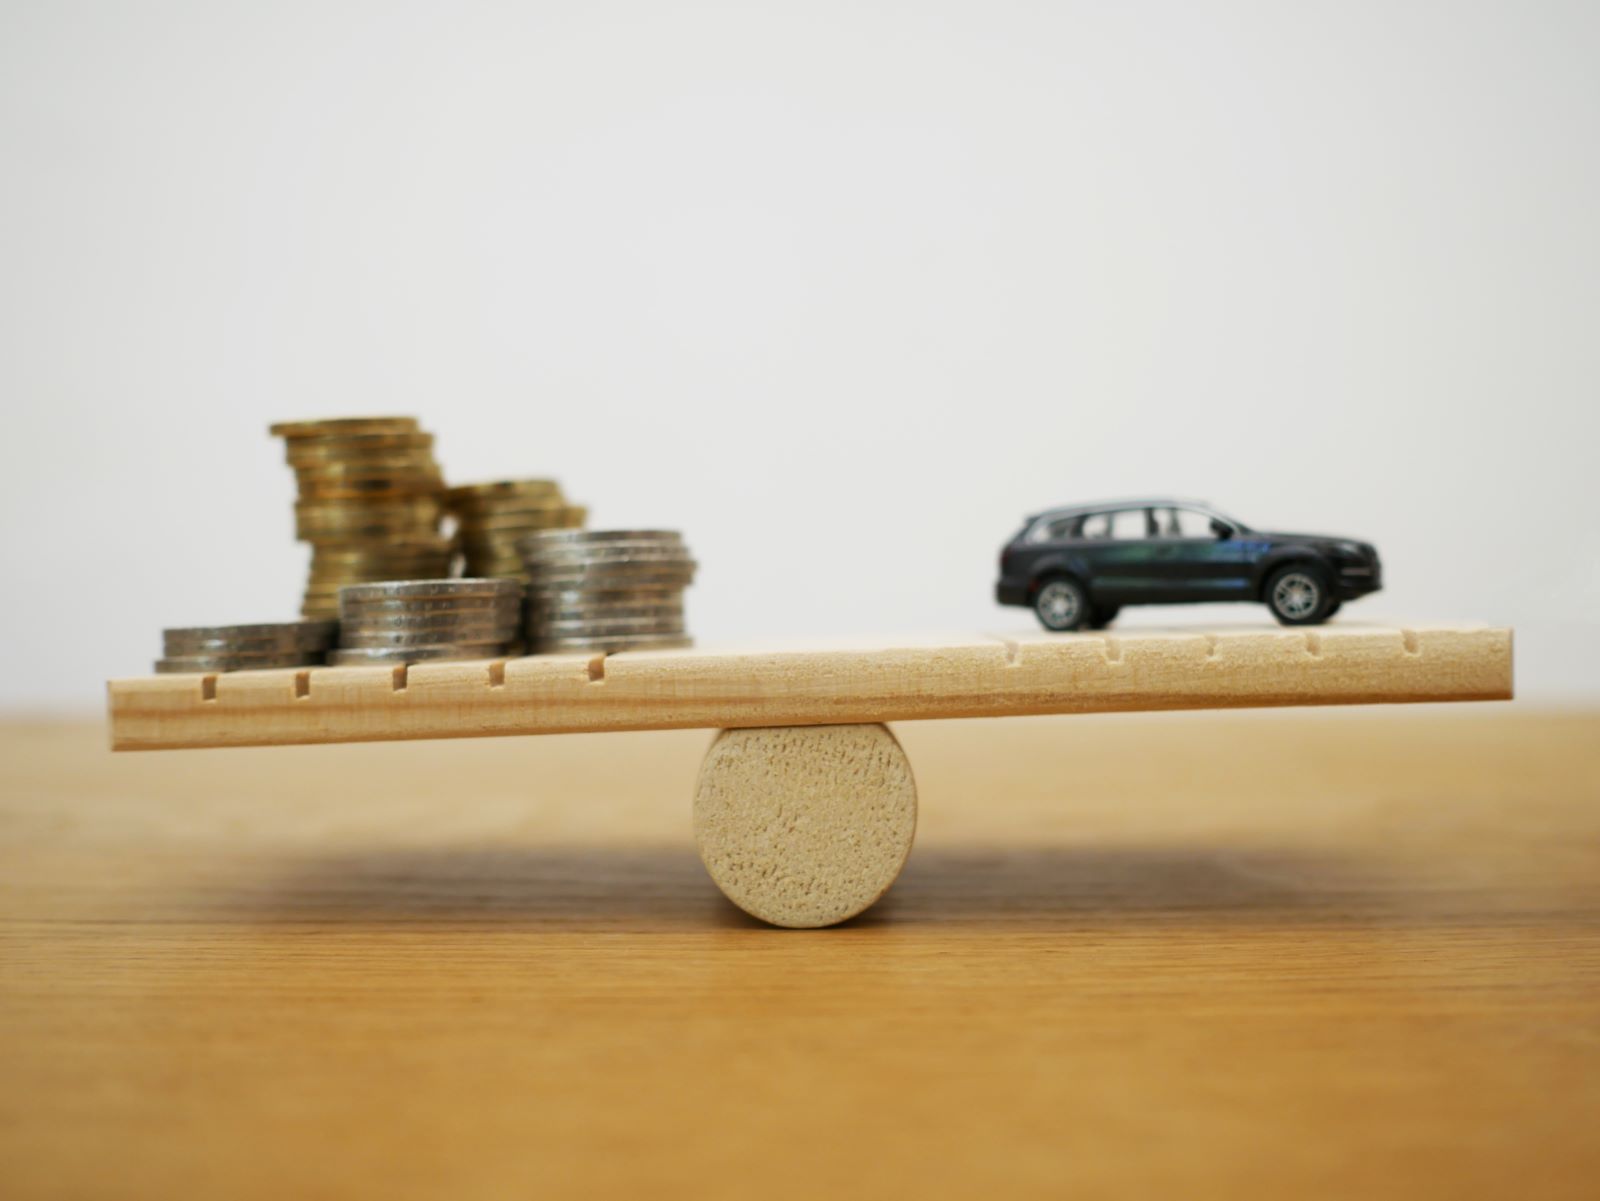 The Difference Between Sales Price, Dealer Price, Invoice Price, MSRP, and More